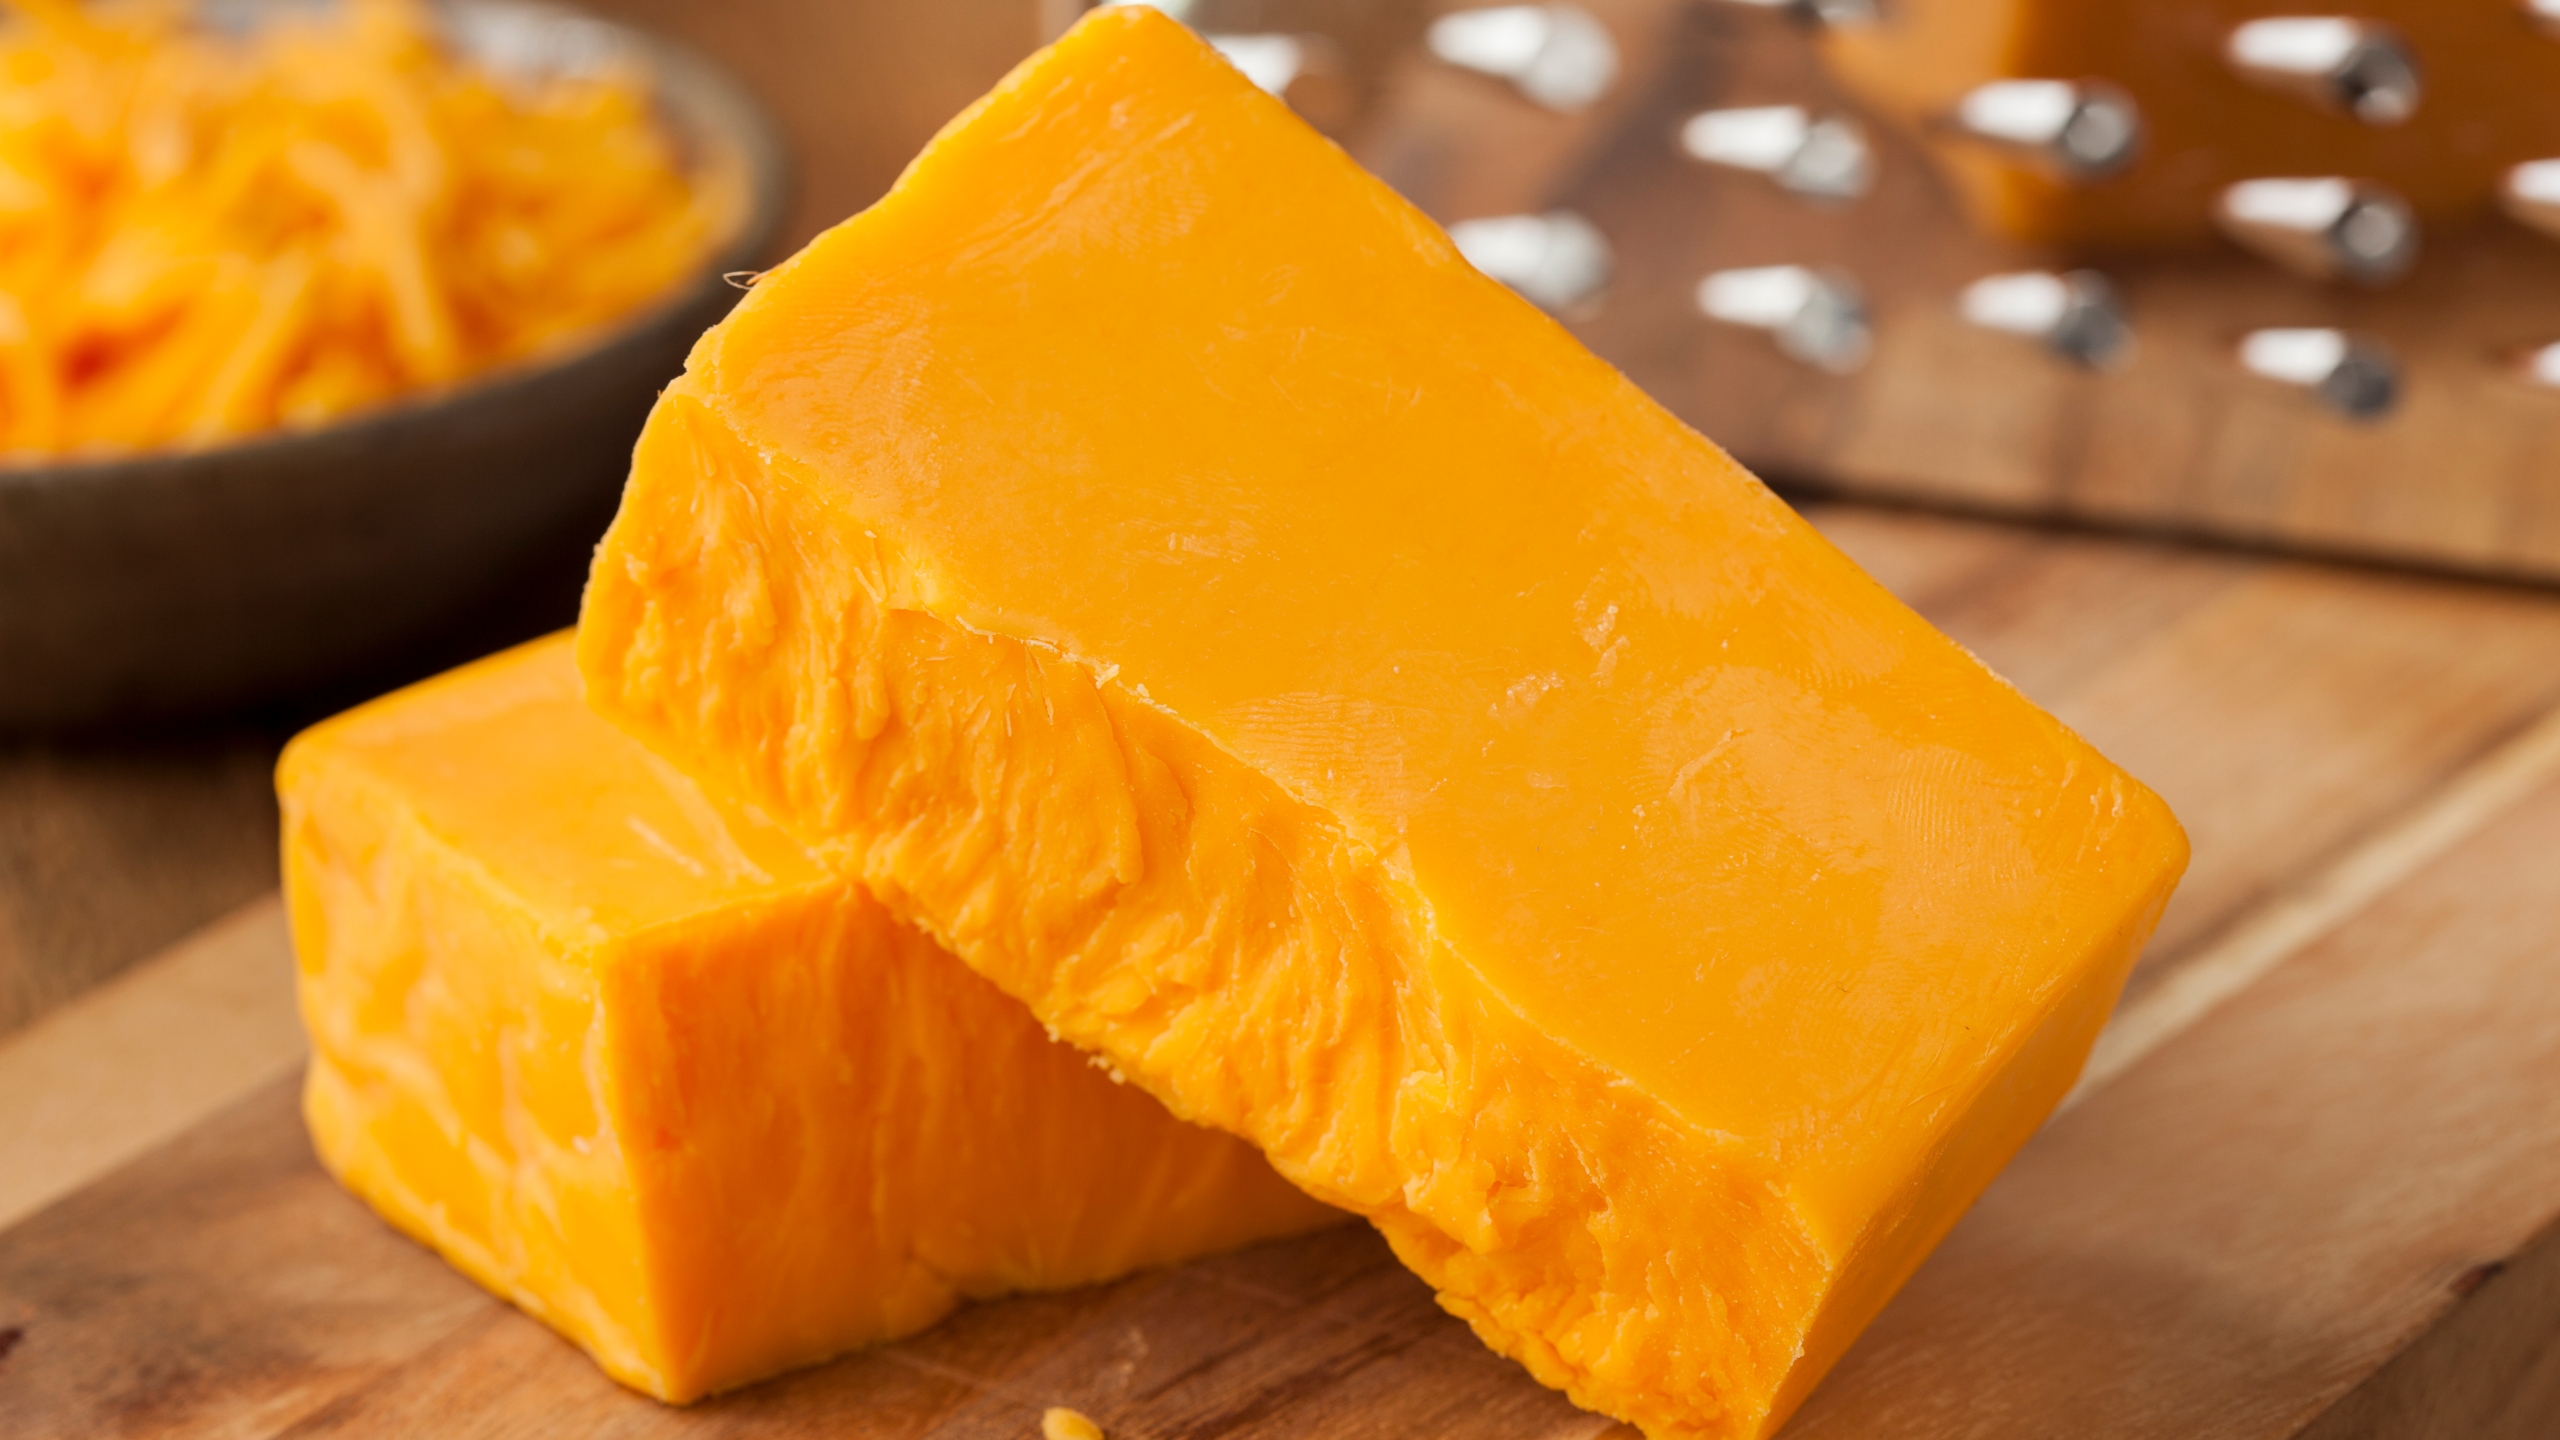 Cheeses sold in Missouri and other states recalled